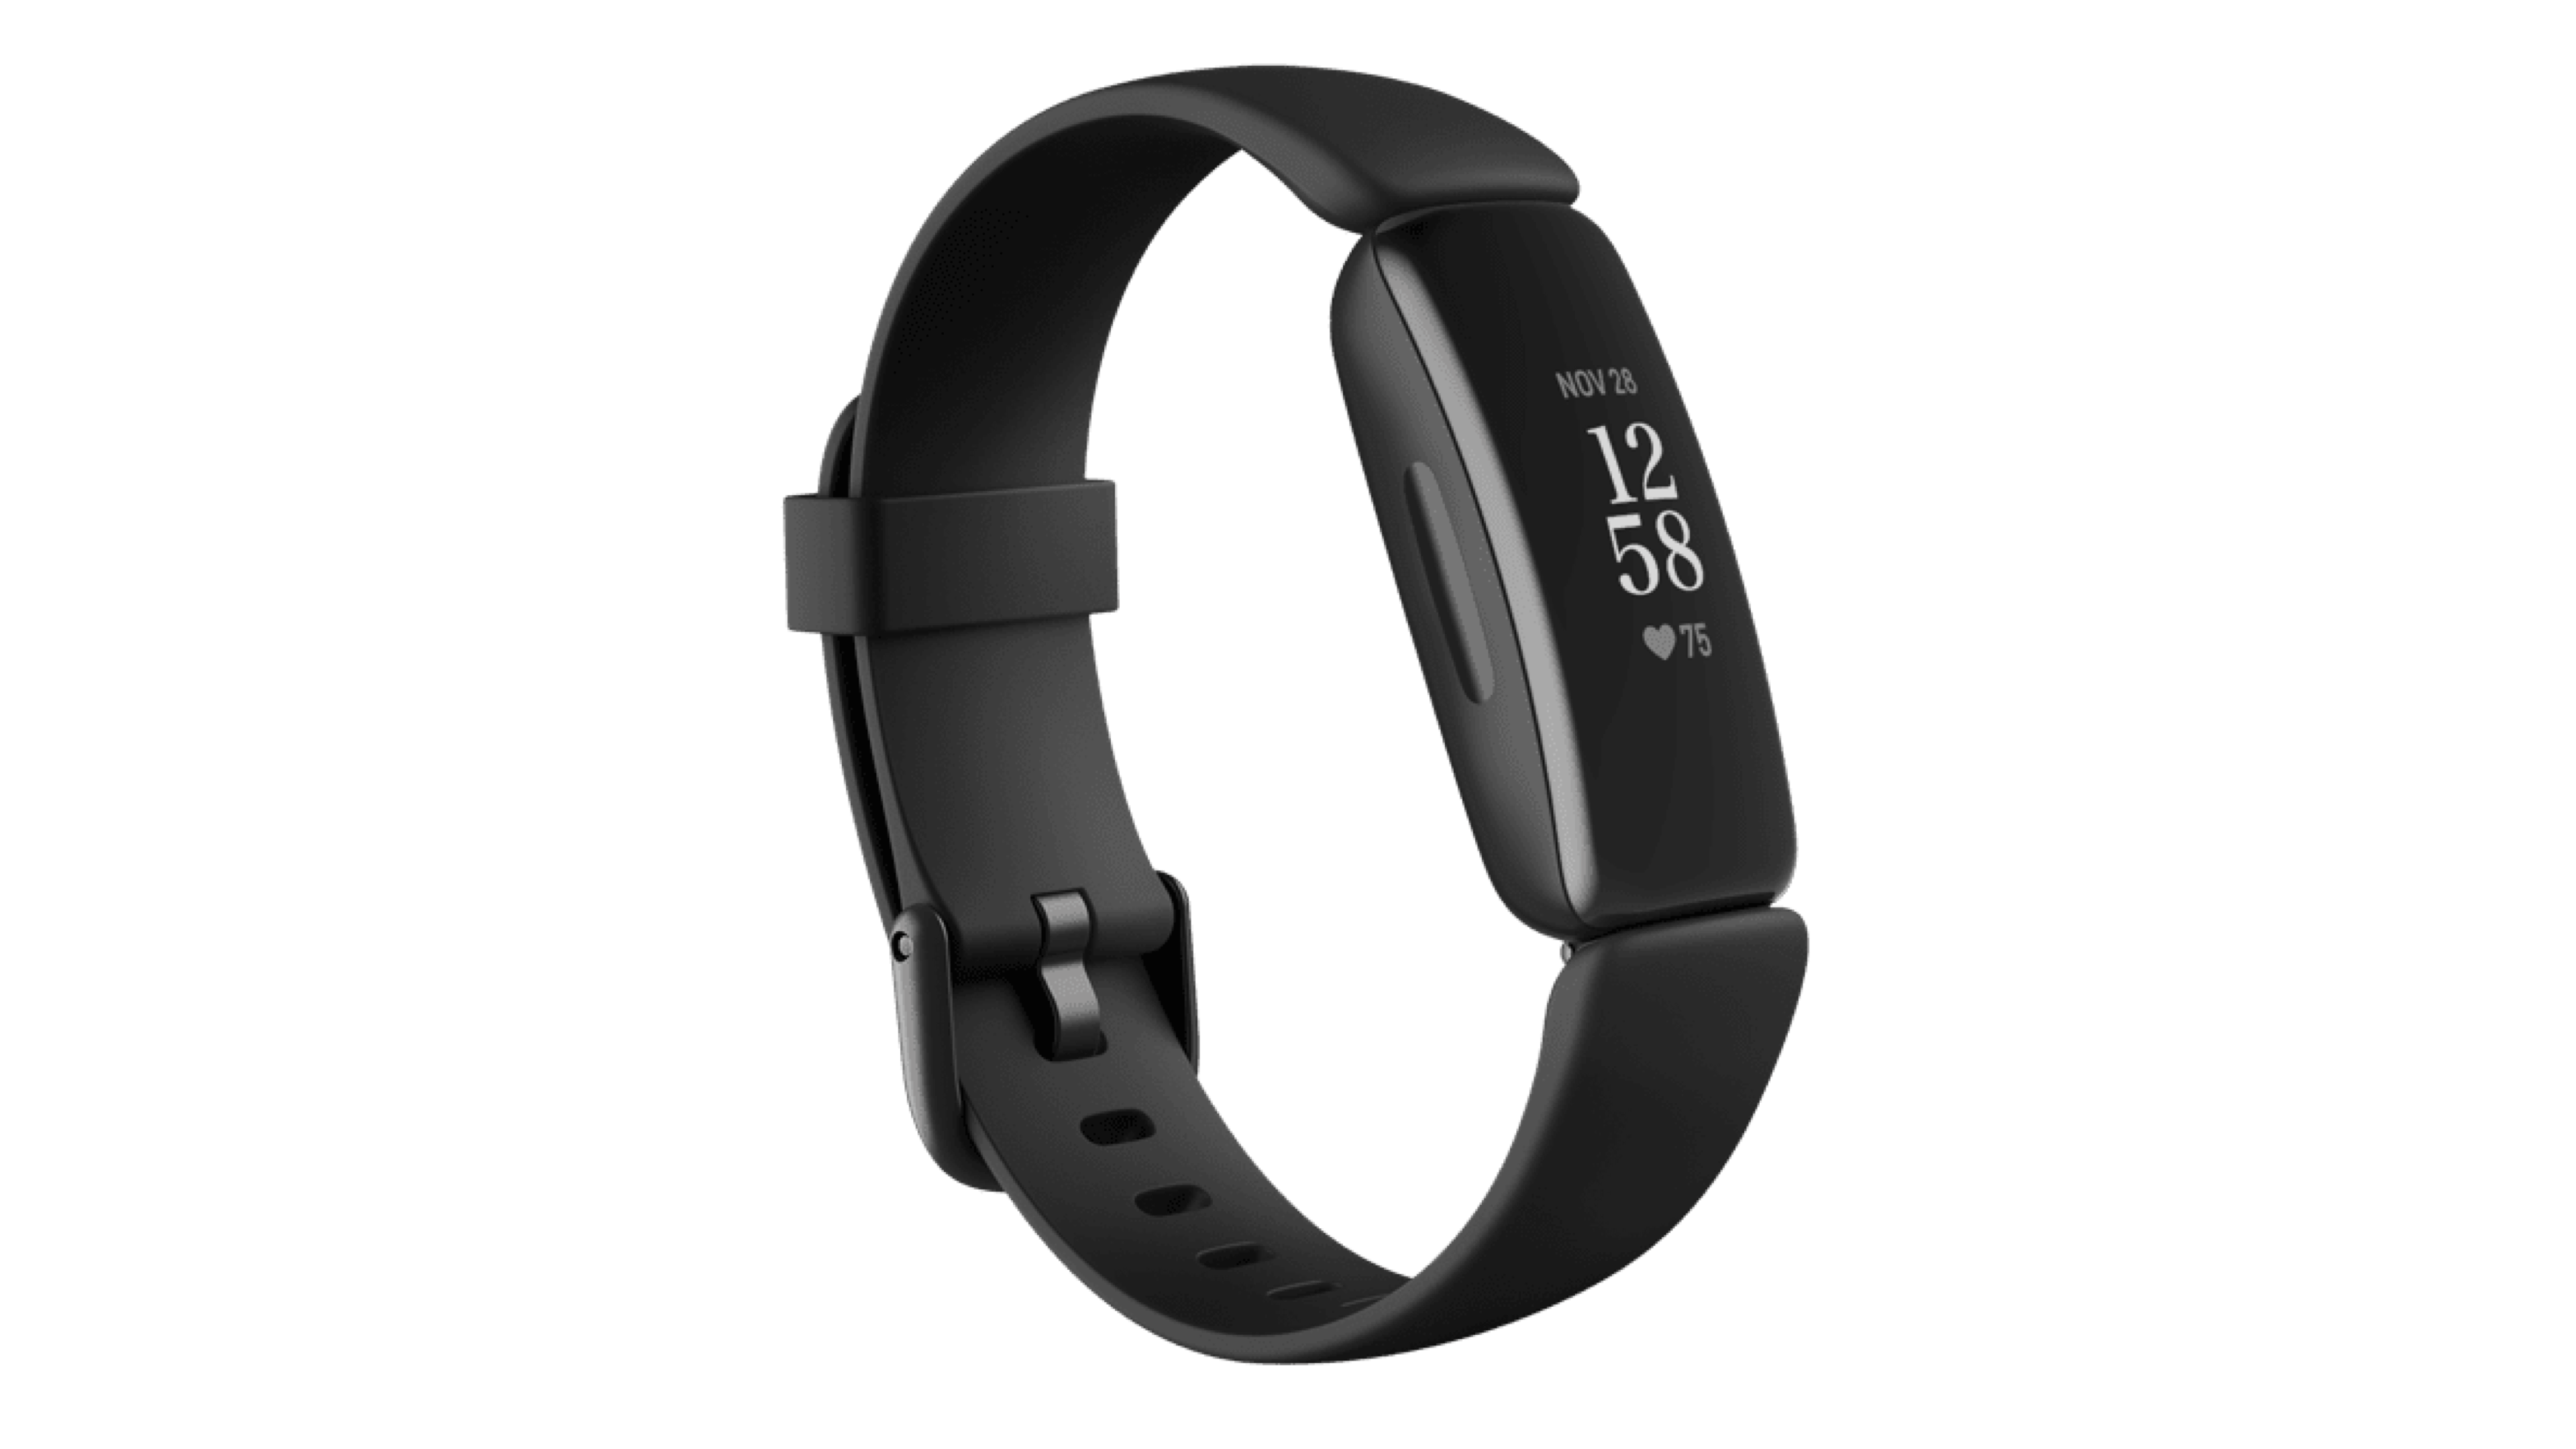 fitbit activity tracker to keep count of steps, calories burned, miles walked, hours slept and more